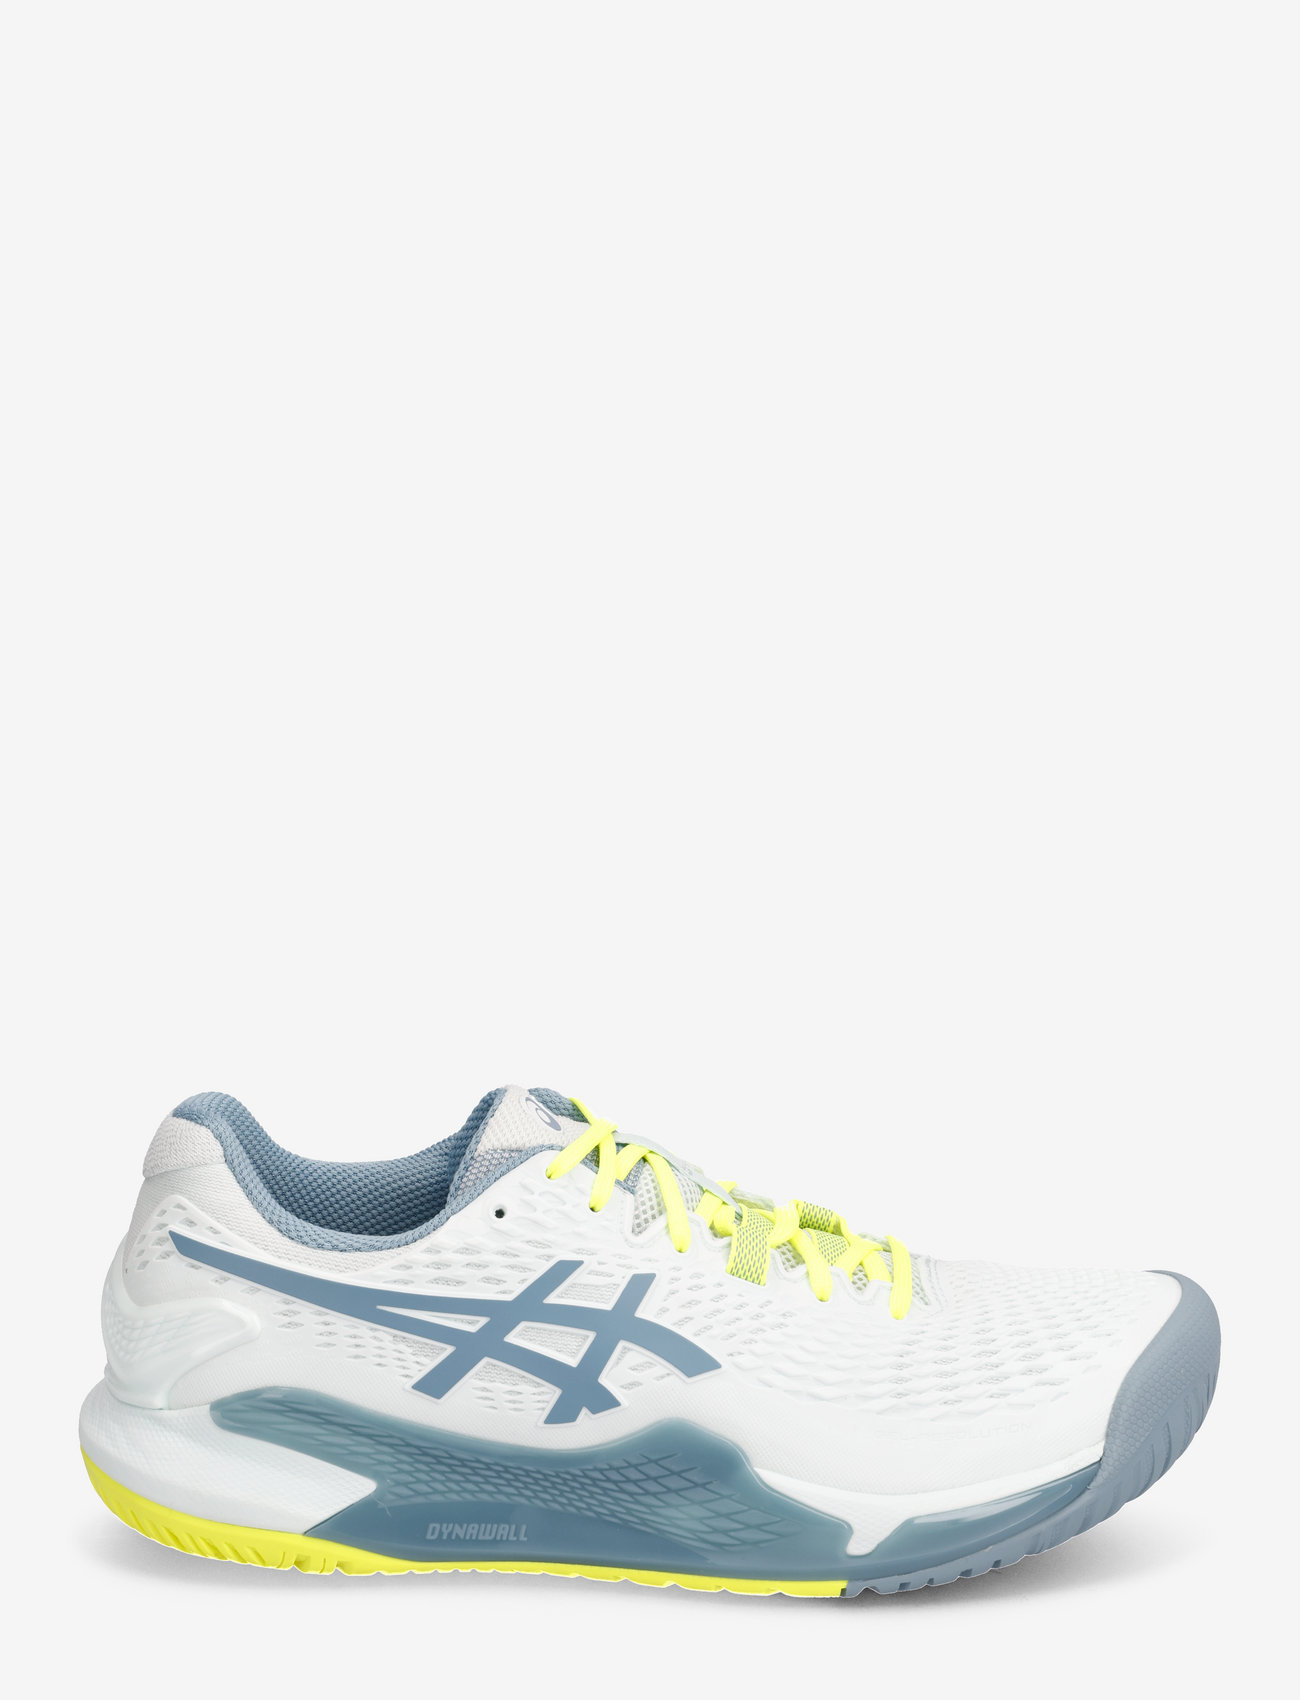 Asics - GEL-RESOLUTION 9 - racketsports shoes - soothing sea/gris blue - 1